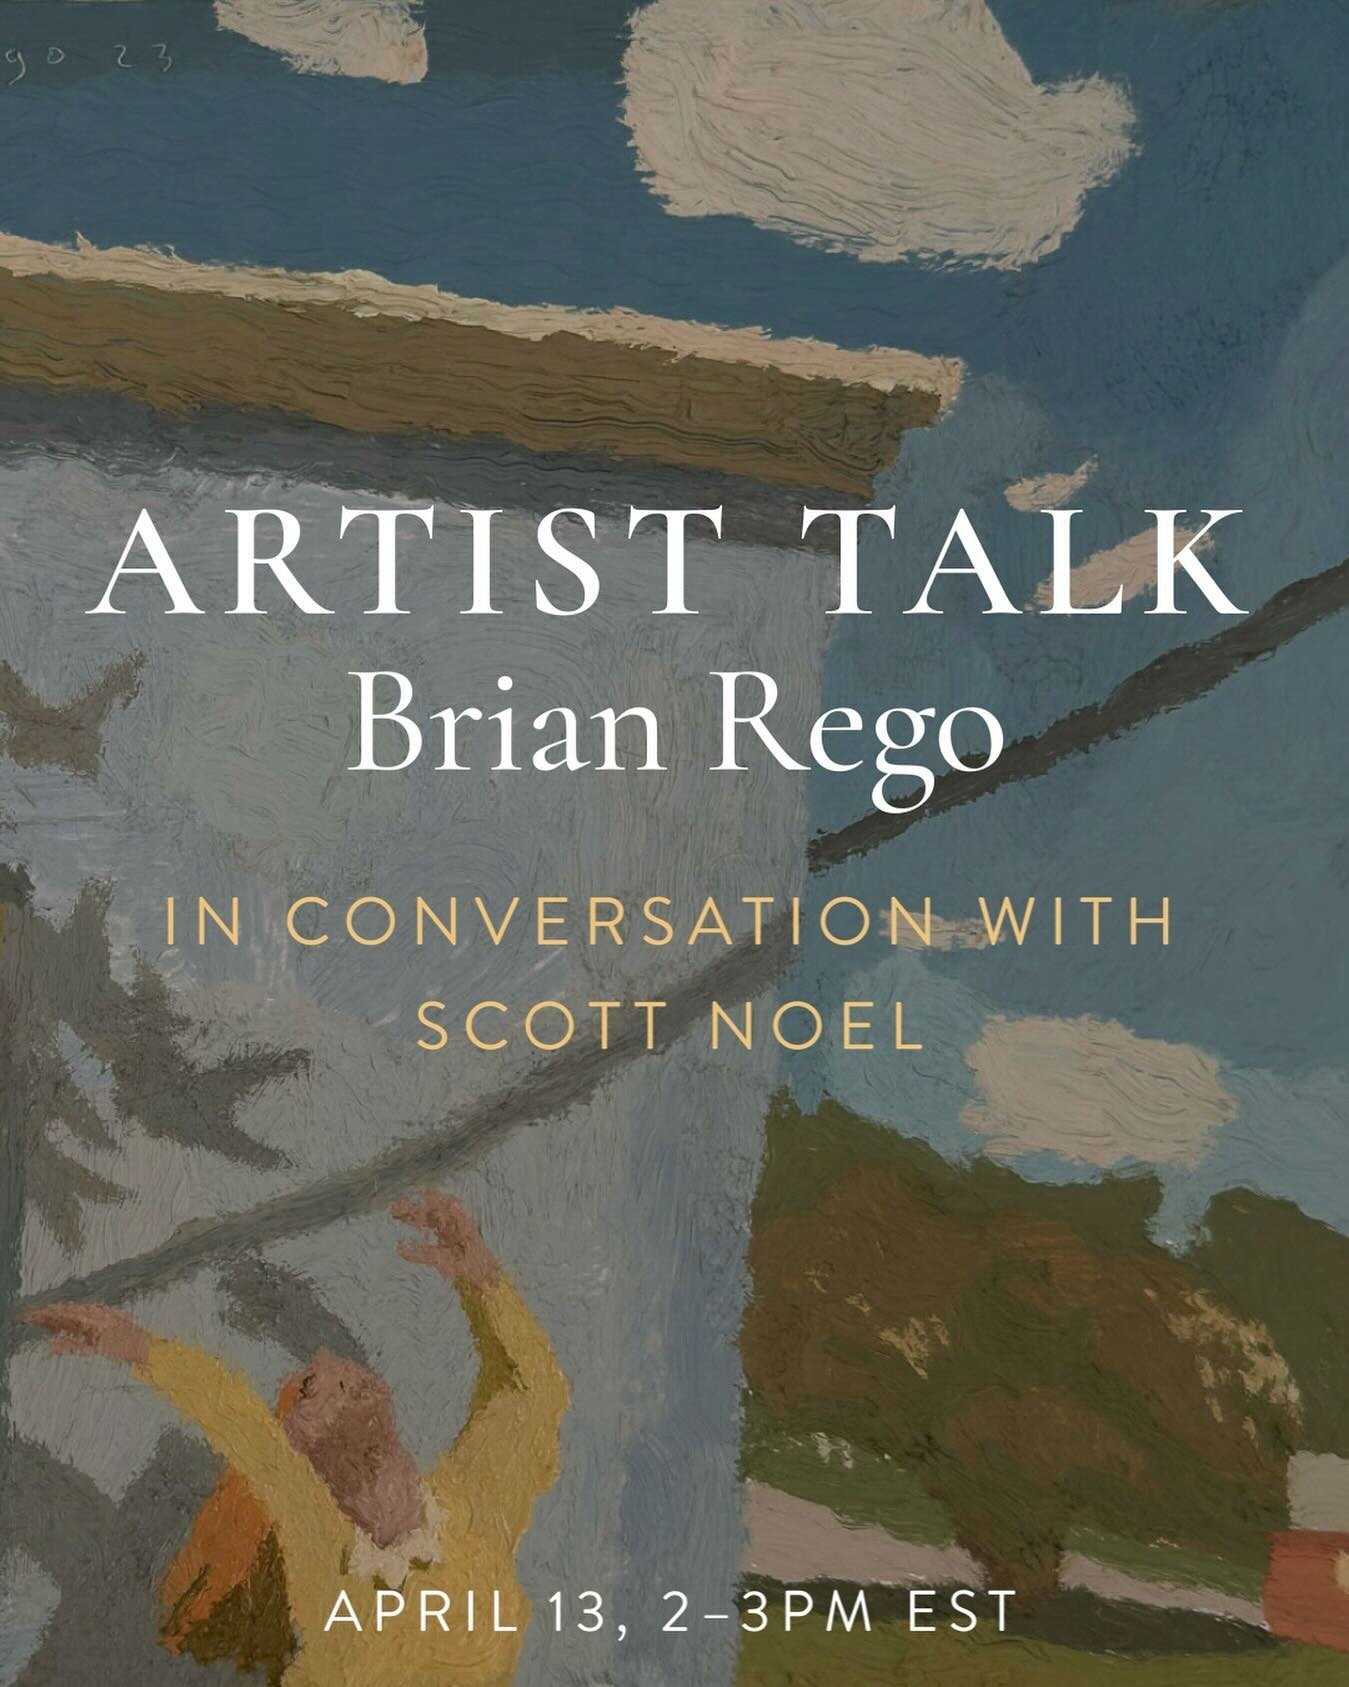 ✨Join us for a Zoom Talk with Brian Rego!✨

Saturday, April 13th
2&ndash;3pm EST

The event will be moderated by Philadelphia-based artist Scott Noel, who will converse with Rego about his current exhibition &ldquo;Reasons I Stay.&rdquo;

Register by